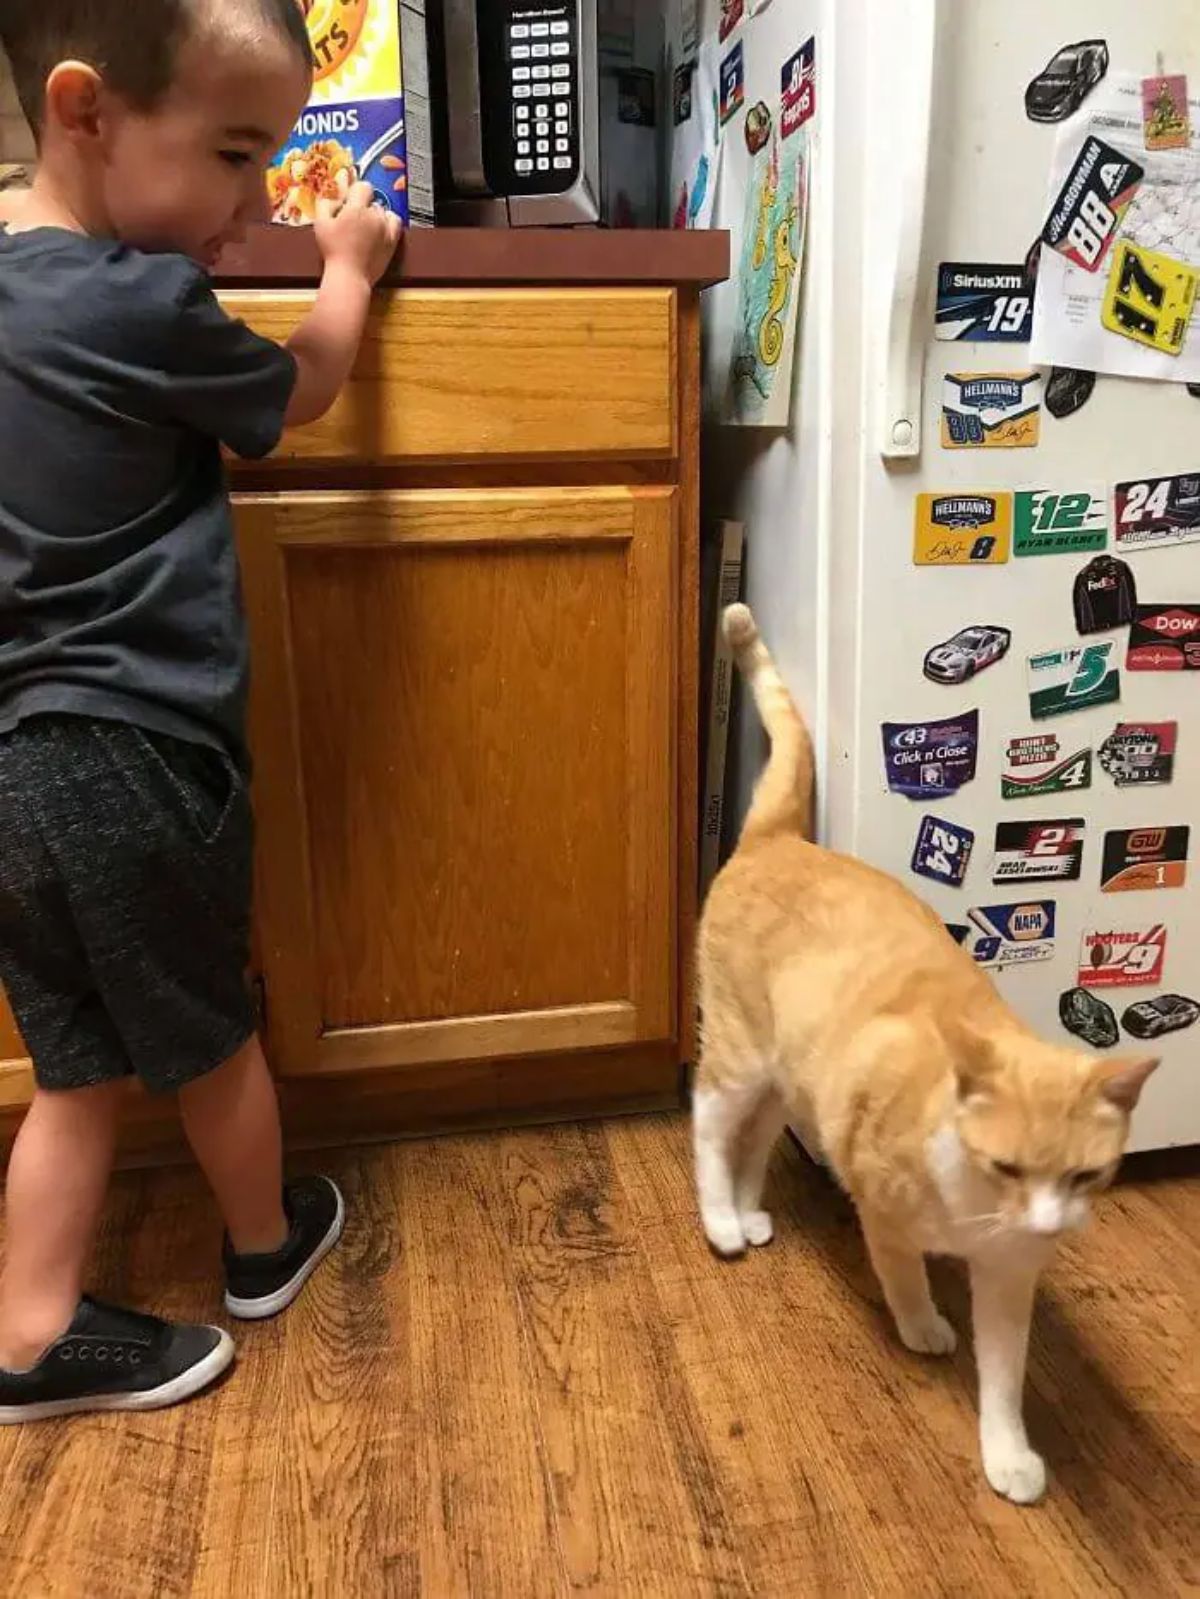 orange and white cat next to a fridge in a kitchen while a little boy stands by a counter